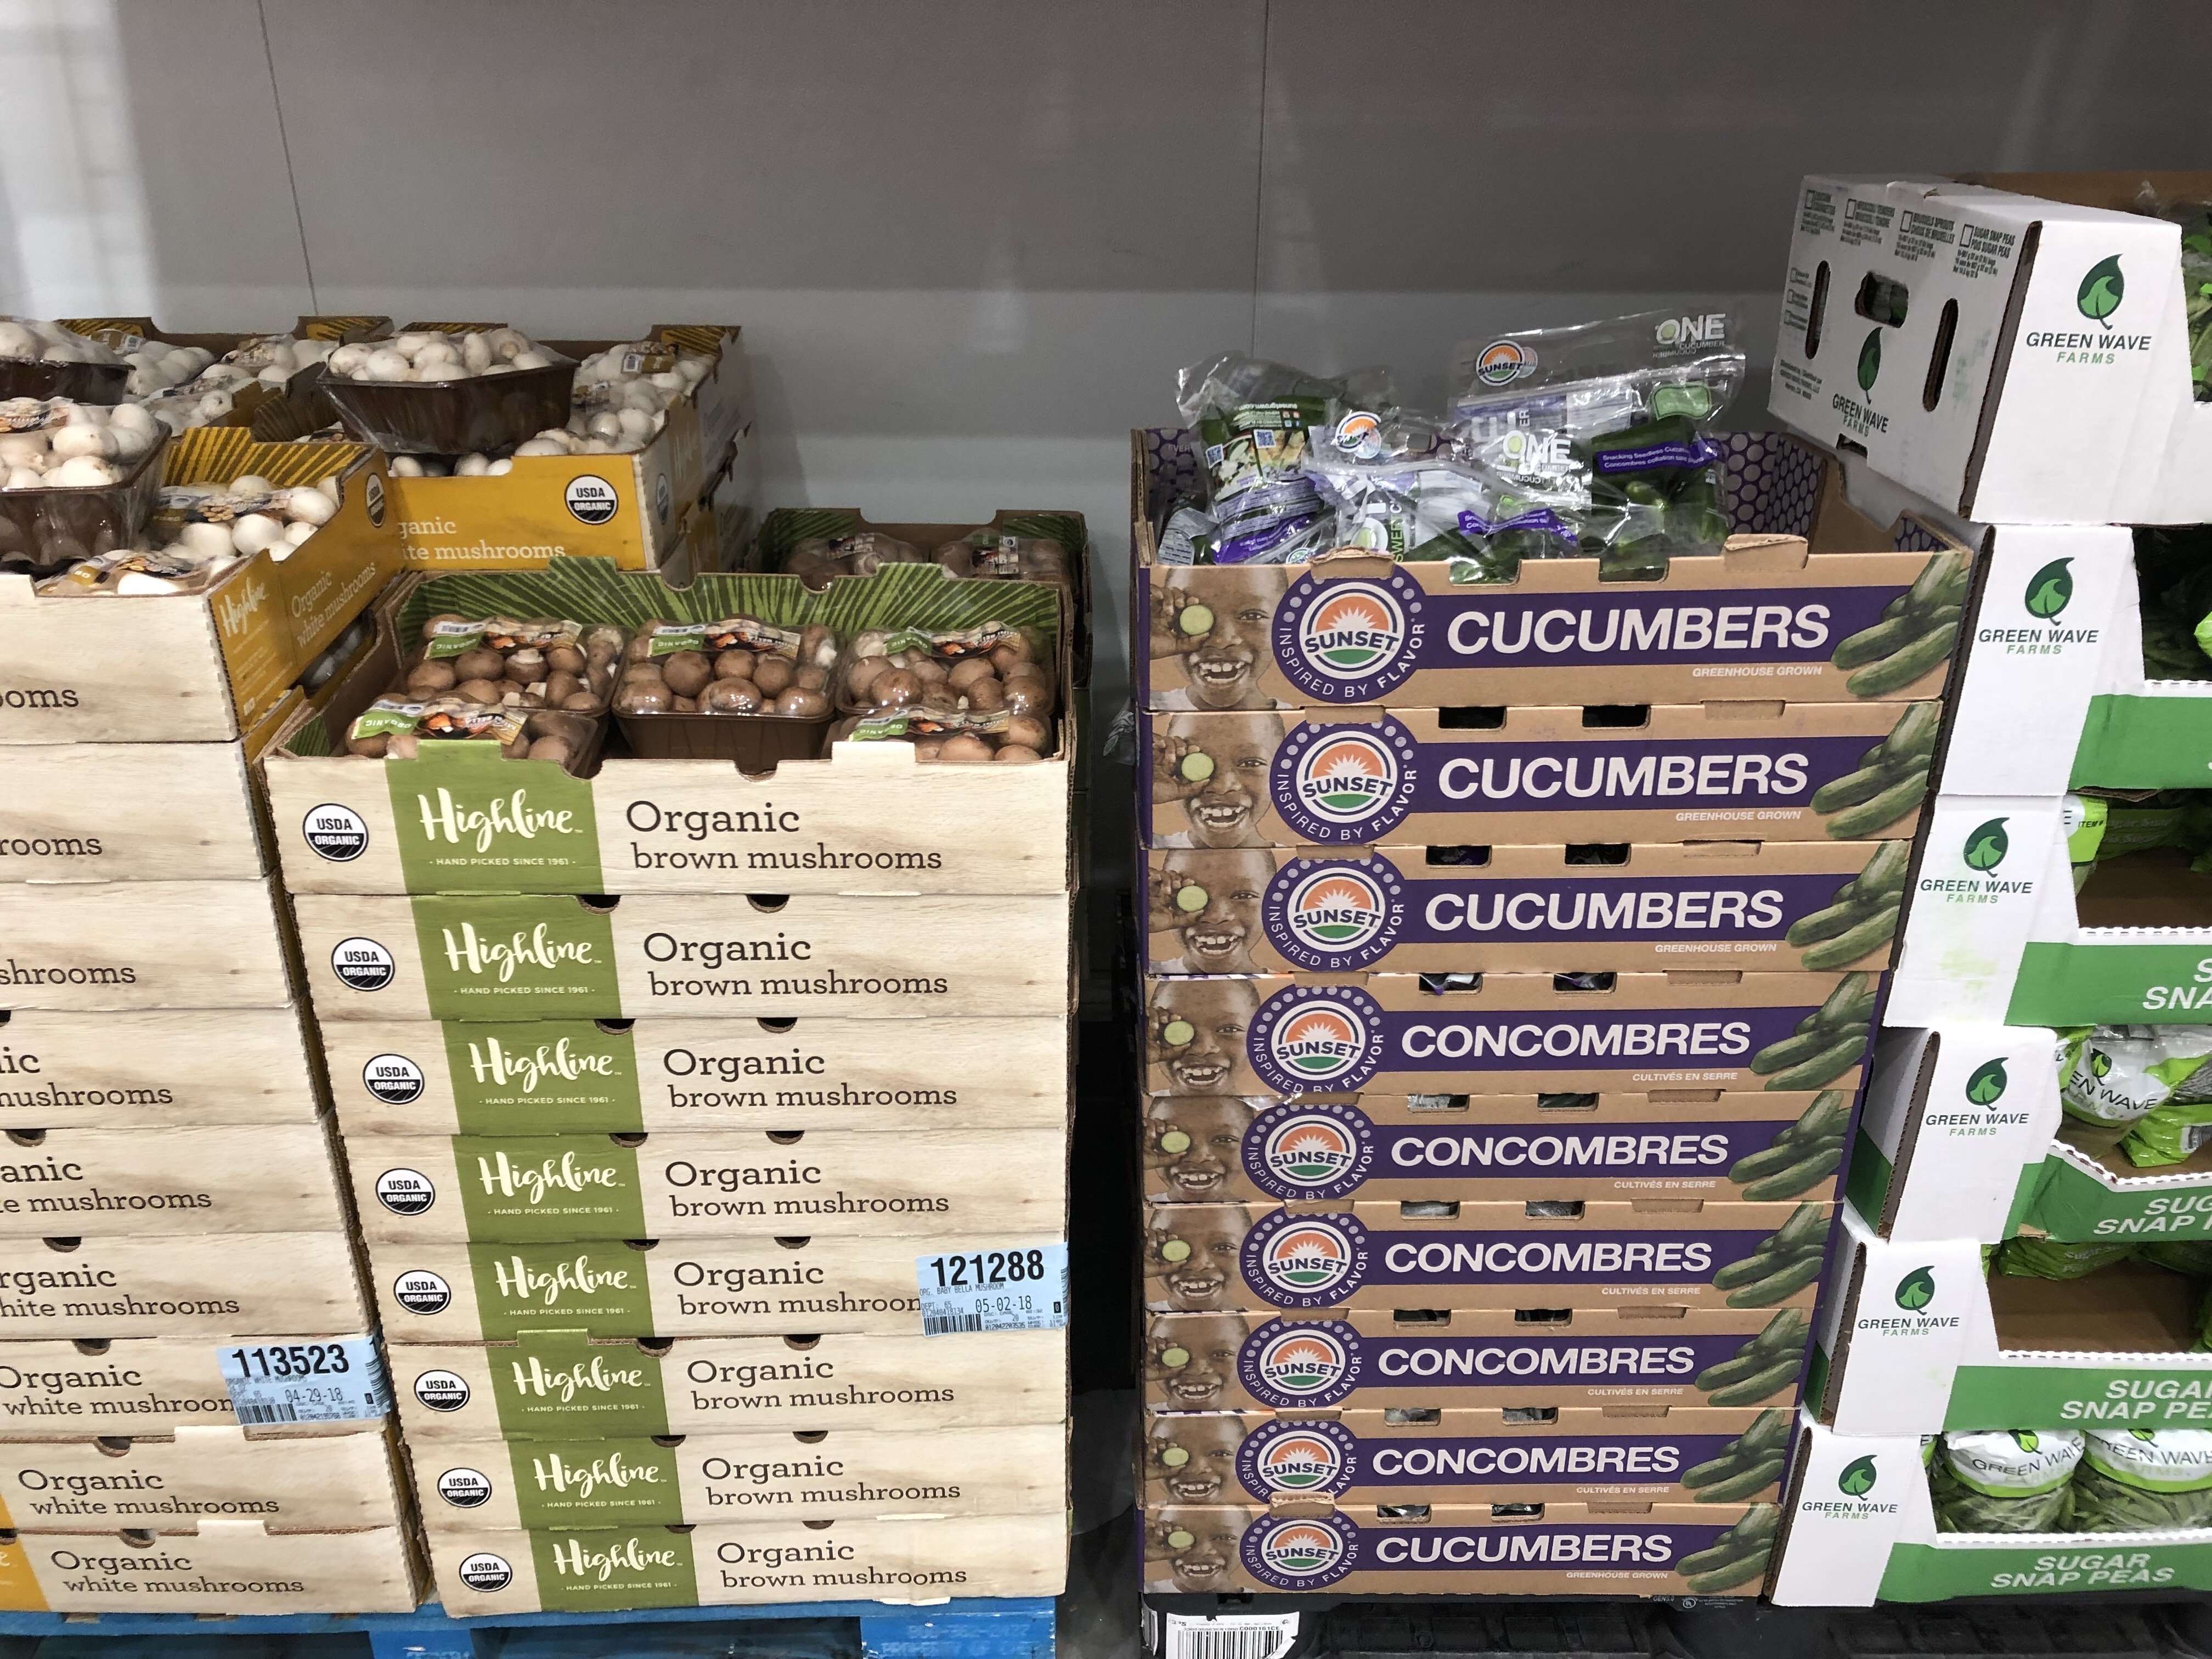 Keto Grocery Items at Costco